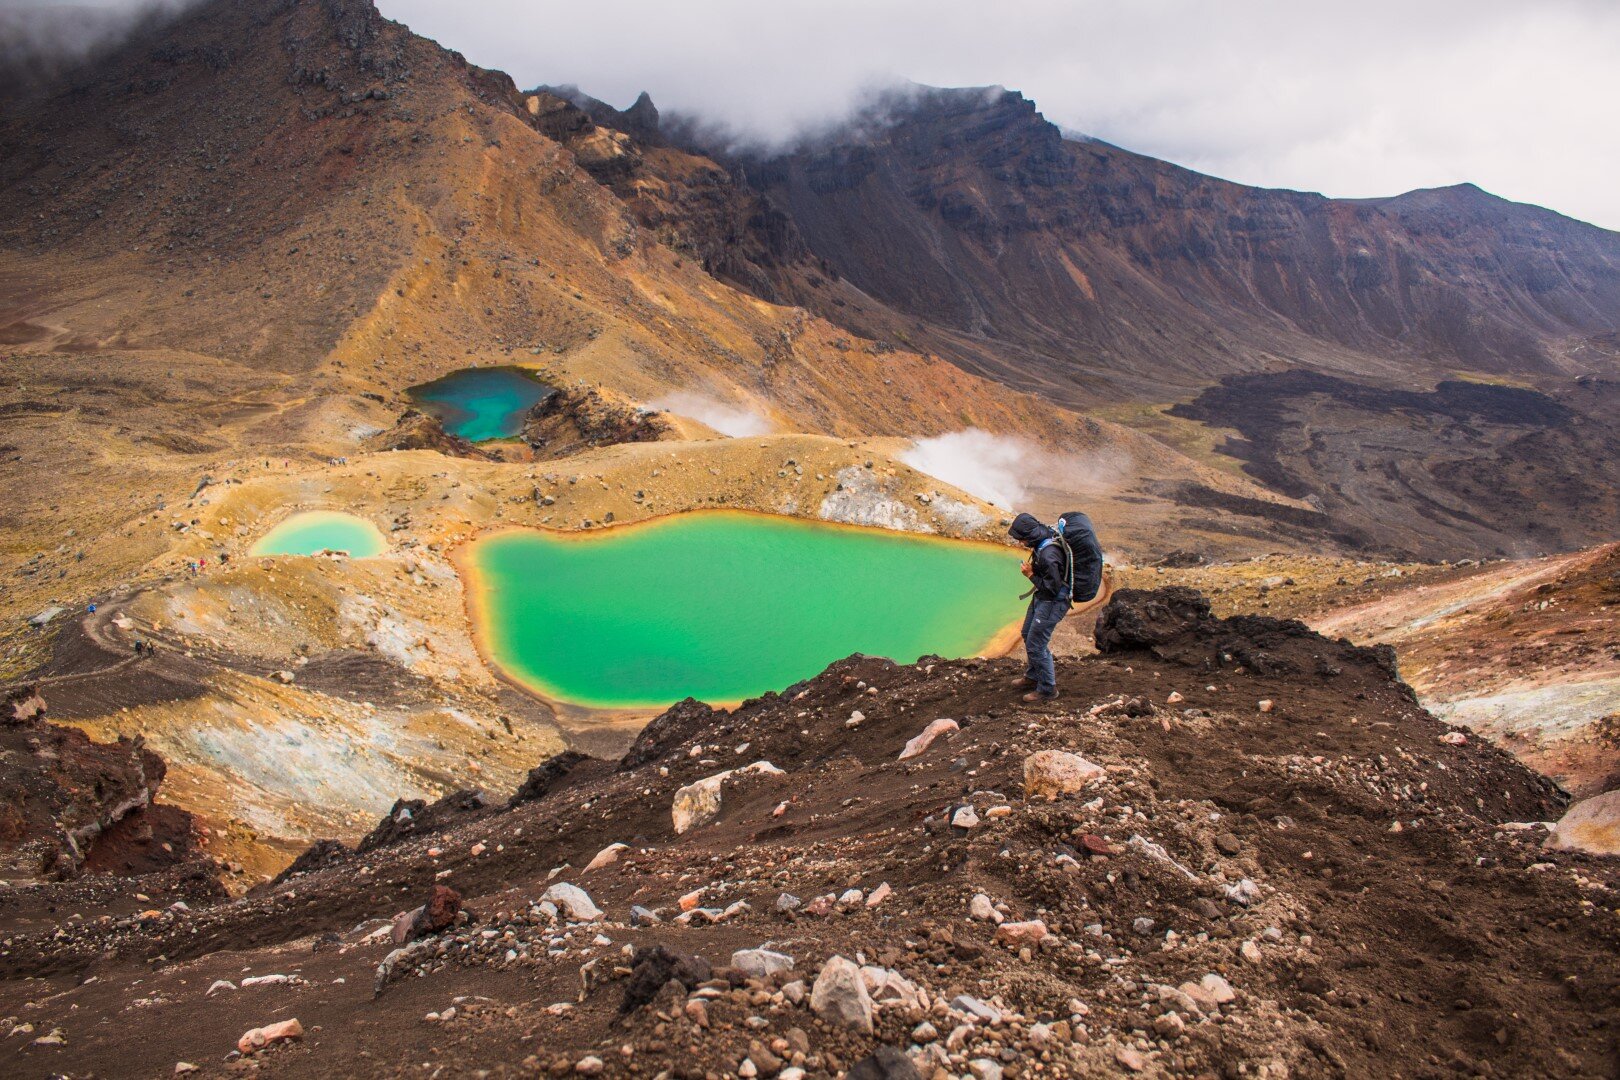 Day 1: The Emerald Lakes and Tongariro Crossing